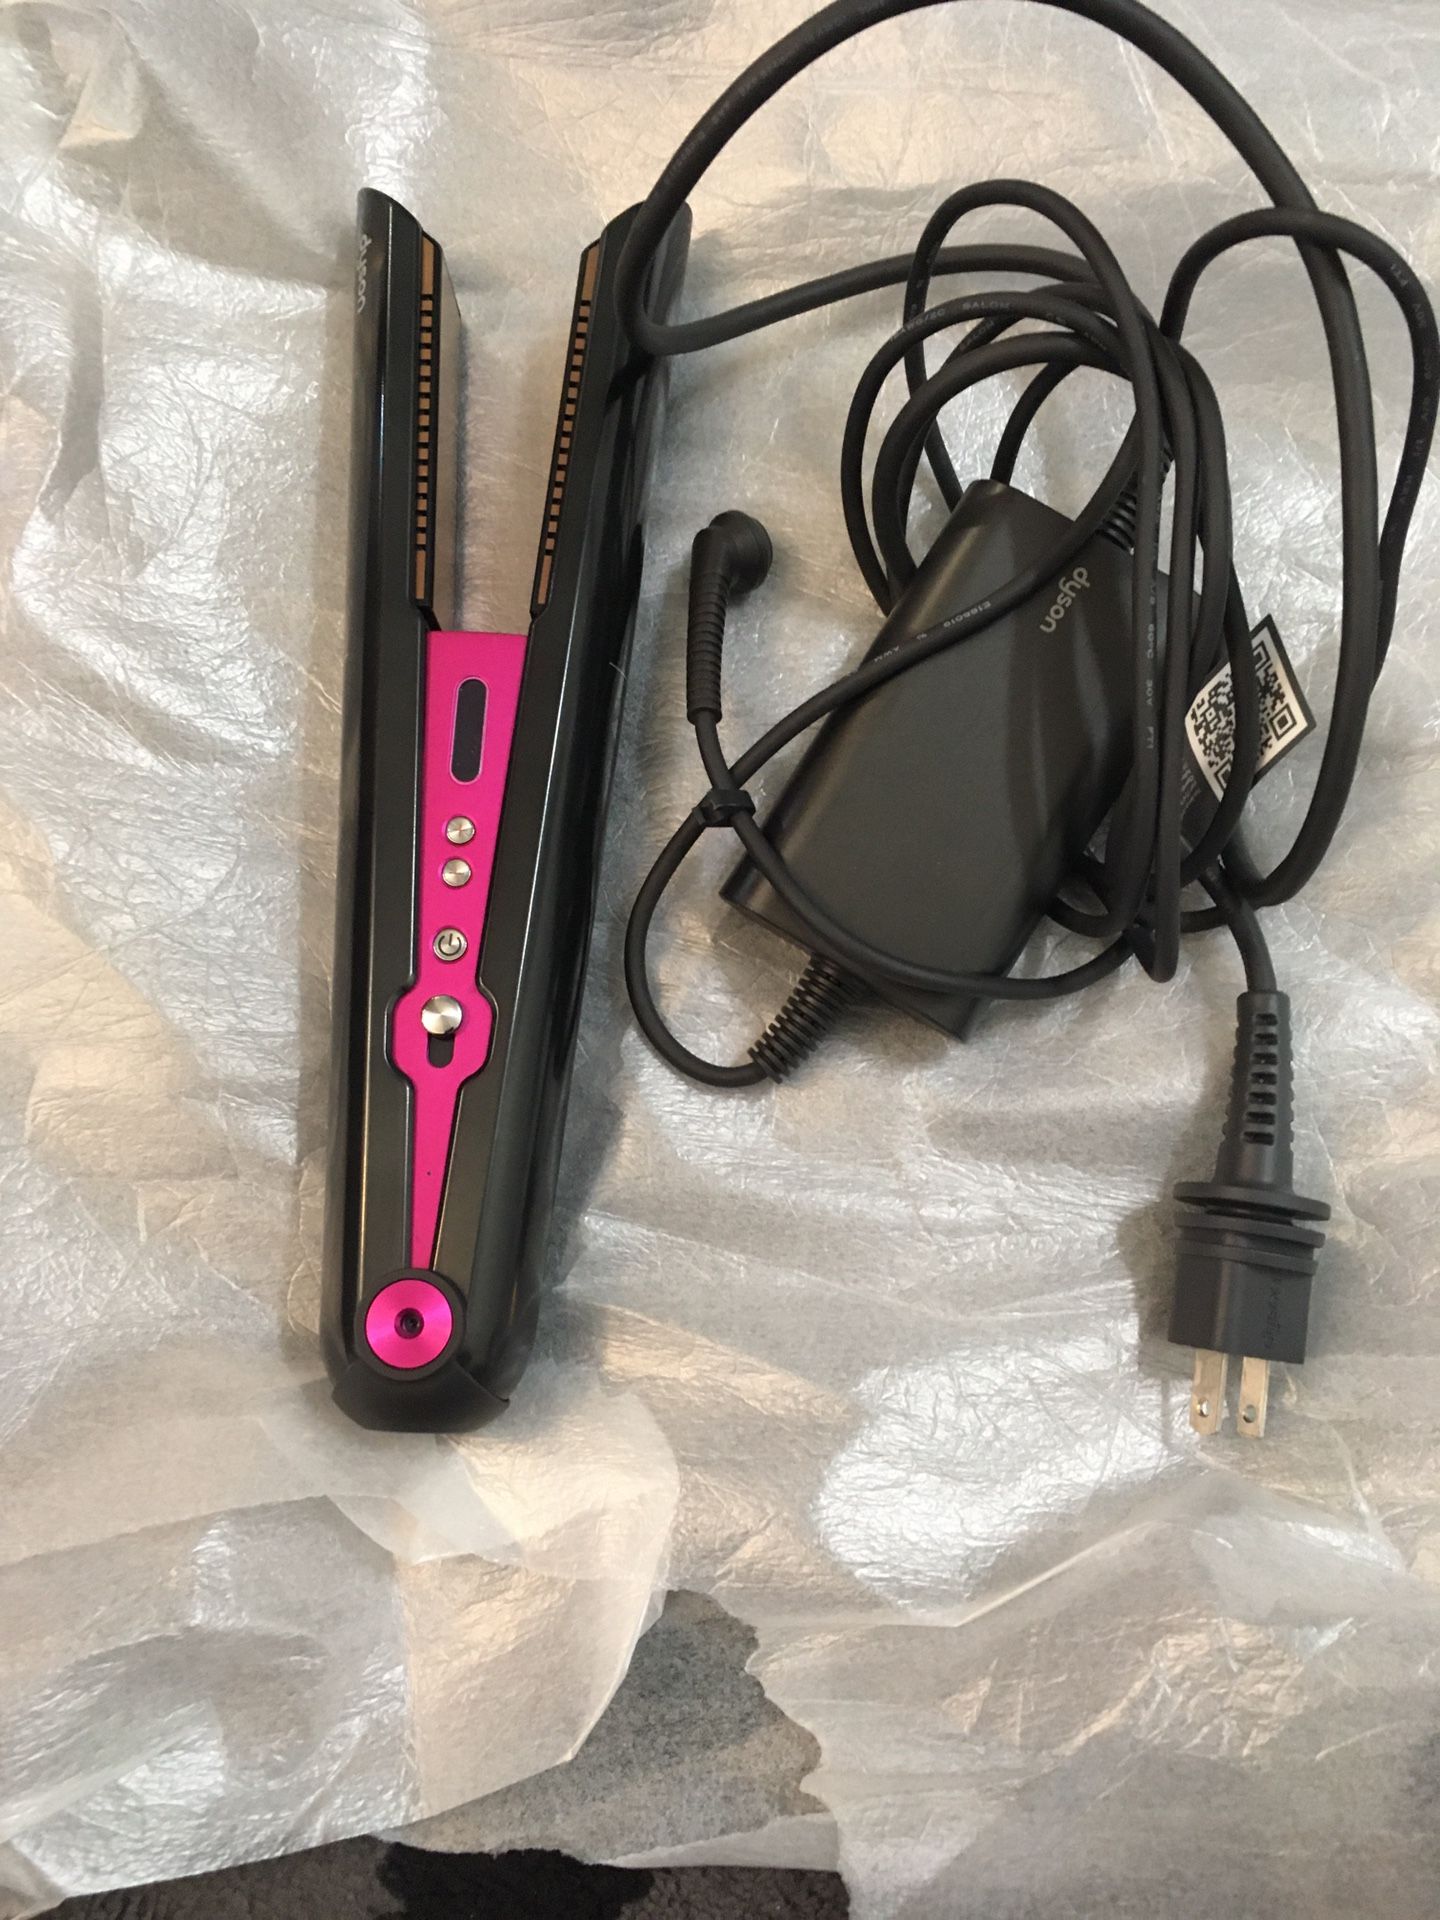 Dyson Corrale Hair Straightener - HS03 Fuschia/Black   In good working condition   Comes with charger